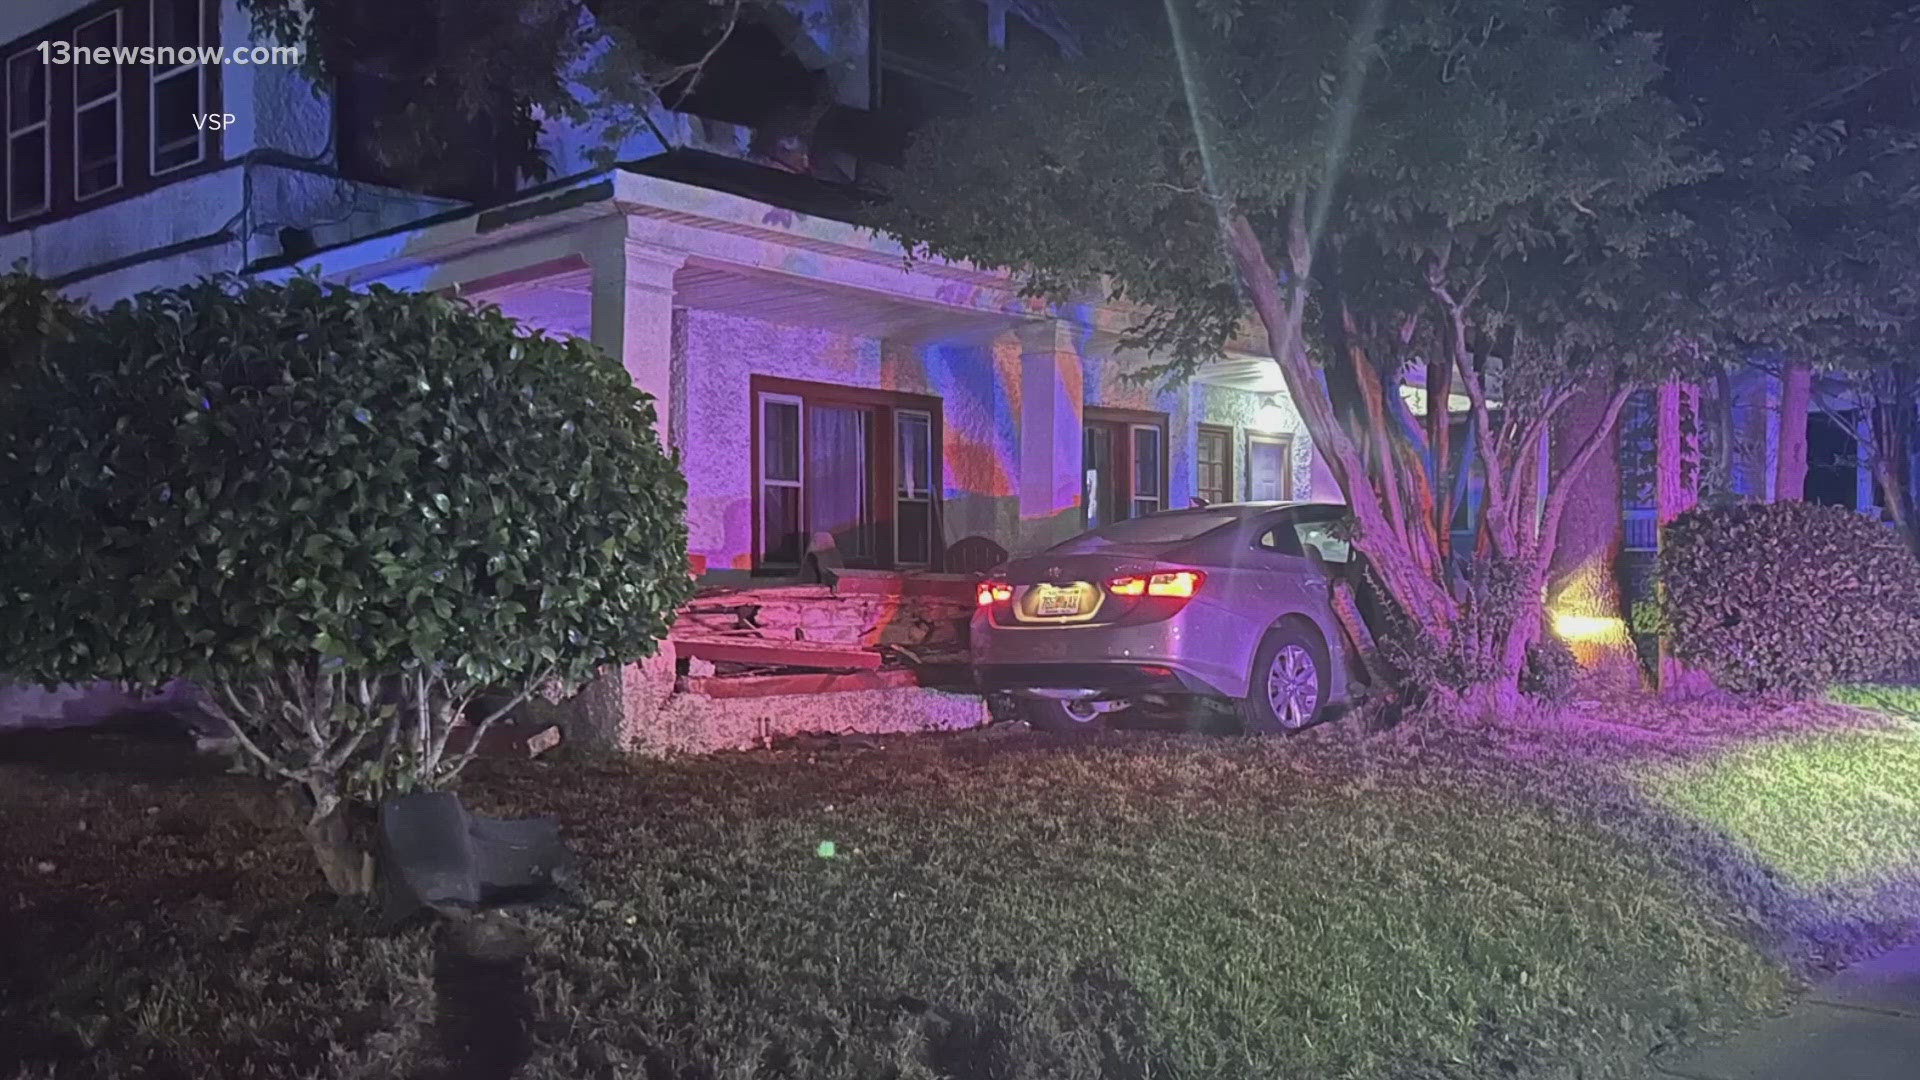 A police pursuit in Hampton ends with a car crashing into a home! Virginia State Police sent us this photo from the scene on Kecoughtan Road overnight.